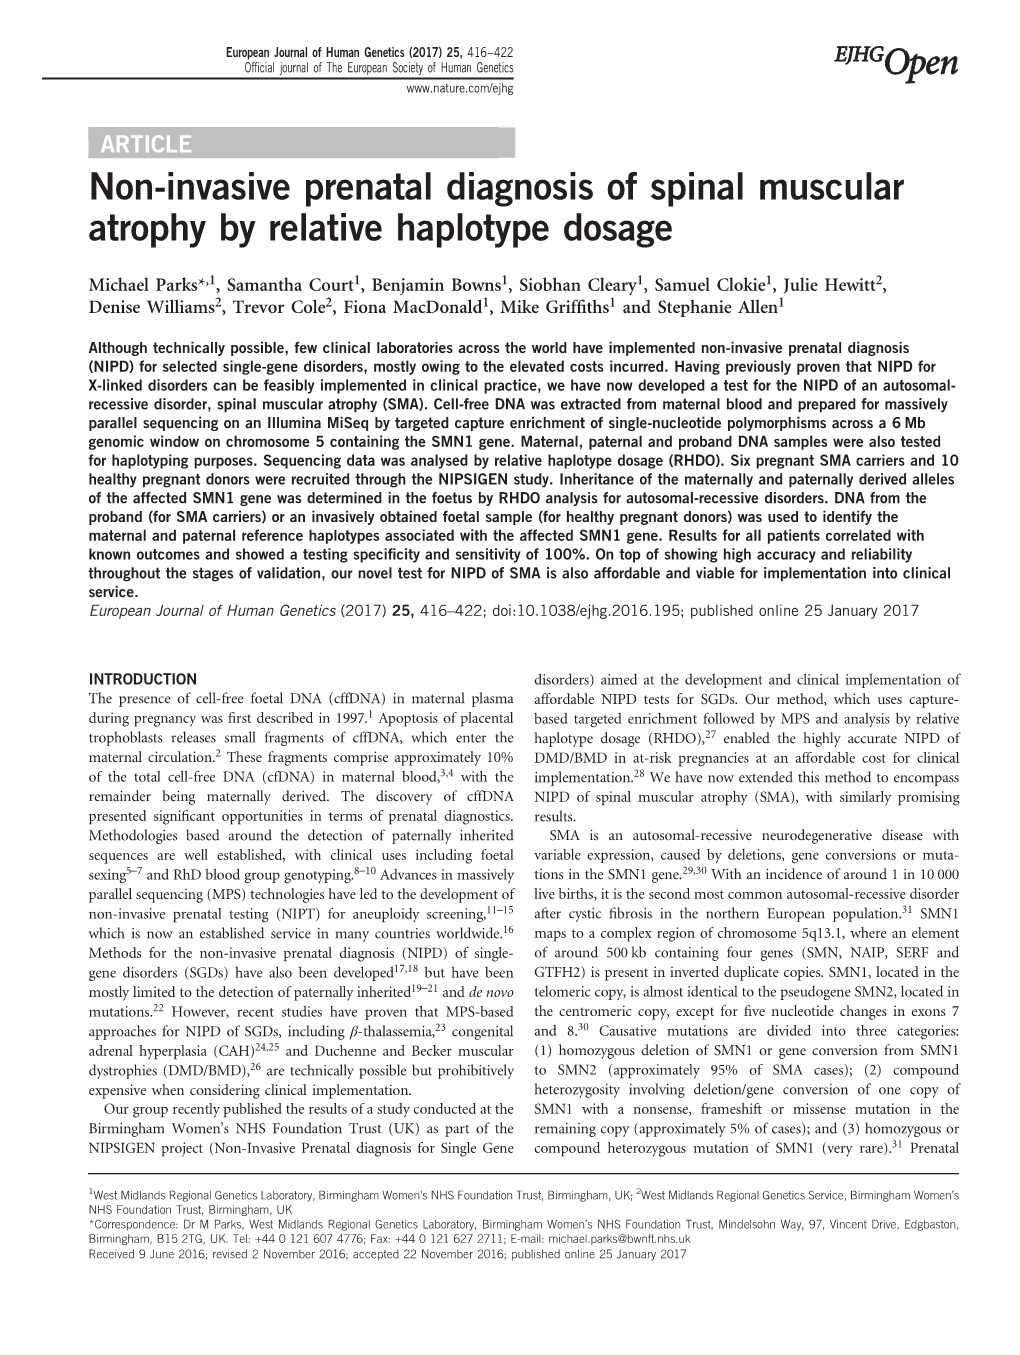 Non-Invasive Prenatal Diagnosis of Spinal Muscular Atrophy by Relative Haplotype Dosage